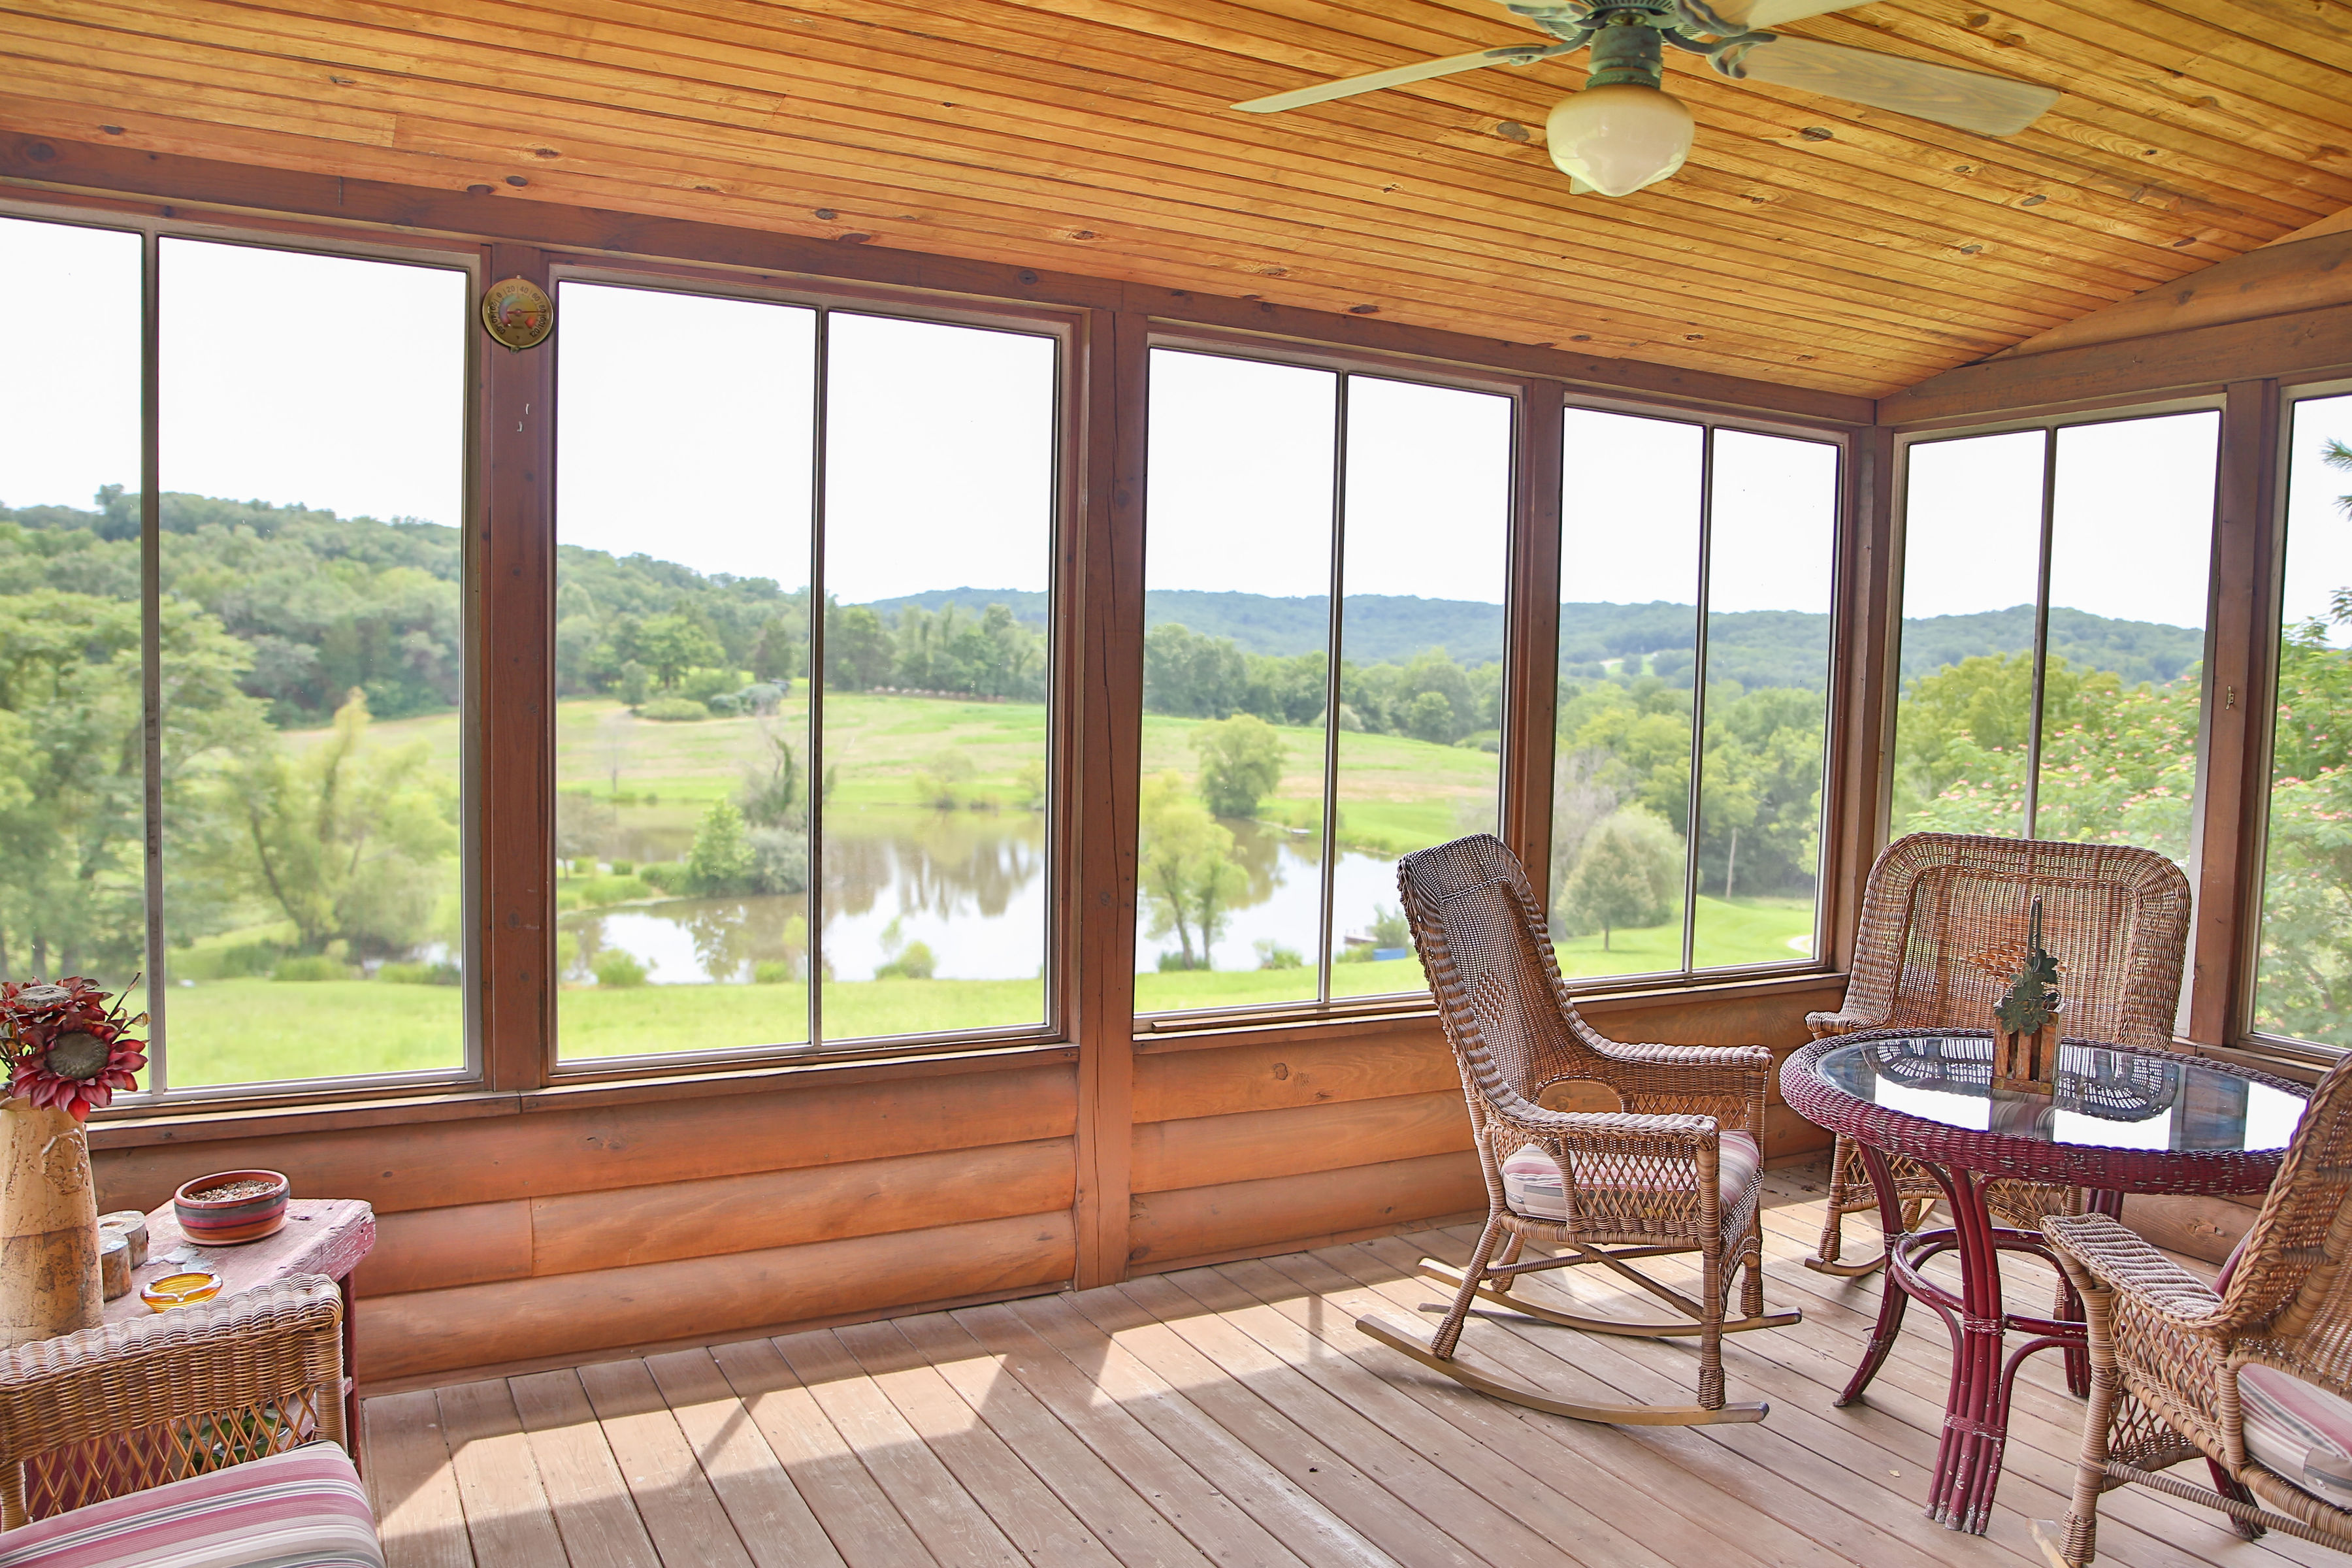 Adam Puchta Winery- A screened in porch with tables and rocking chair seating